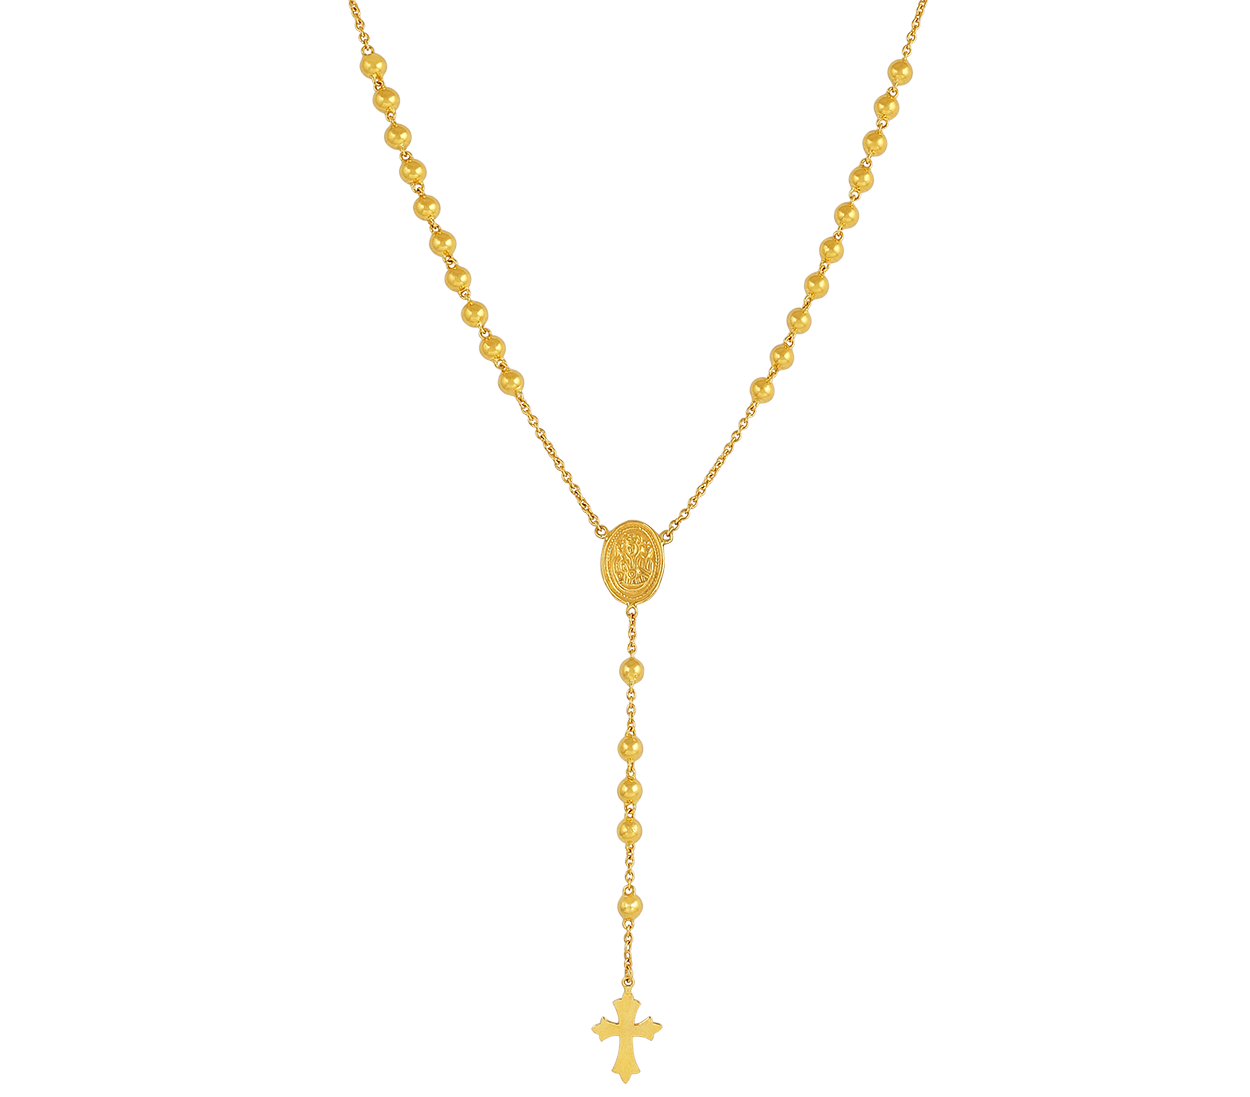 MENS 14K YELLOW GOLD FINISH CUBICZIRCONIA FLOWER CLUSTER ROSARY NECKLACE |  eBay